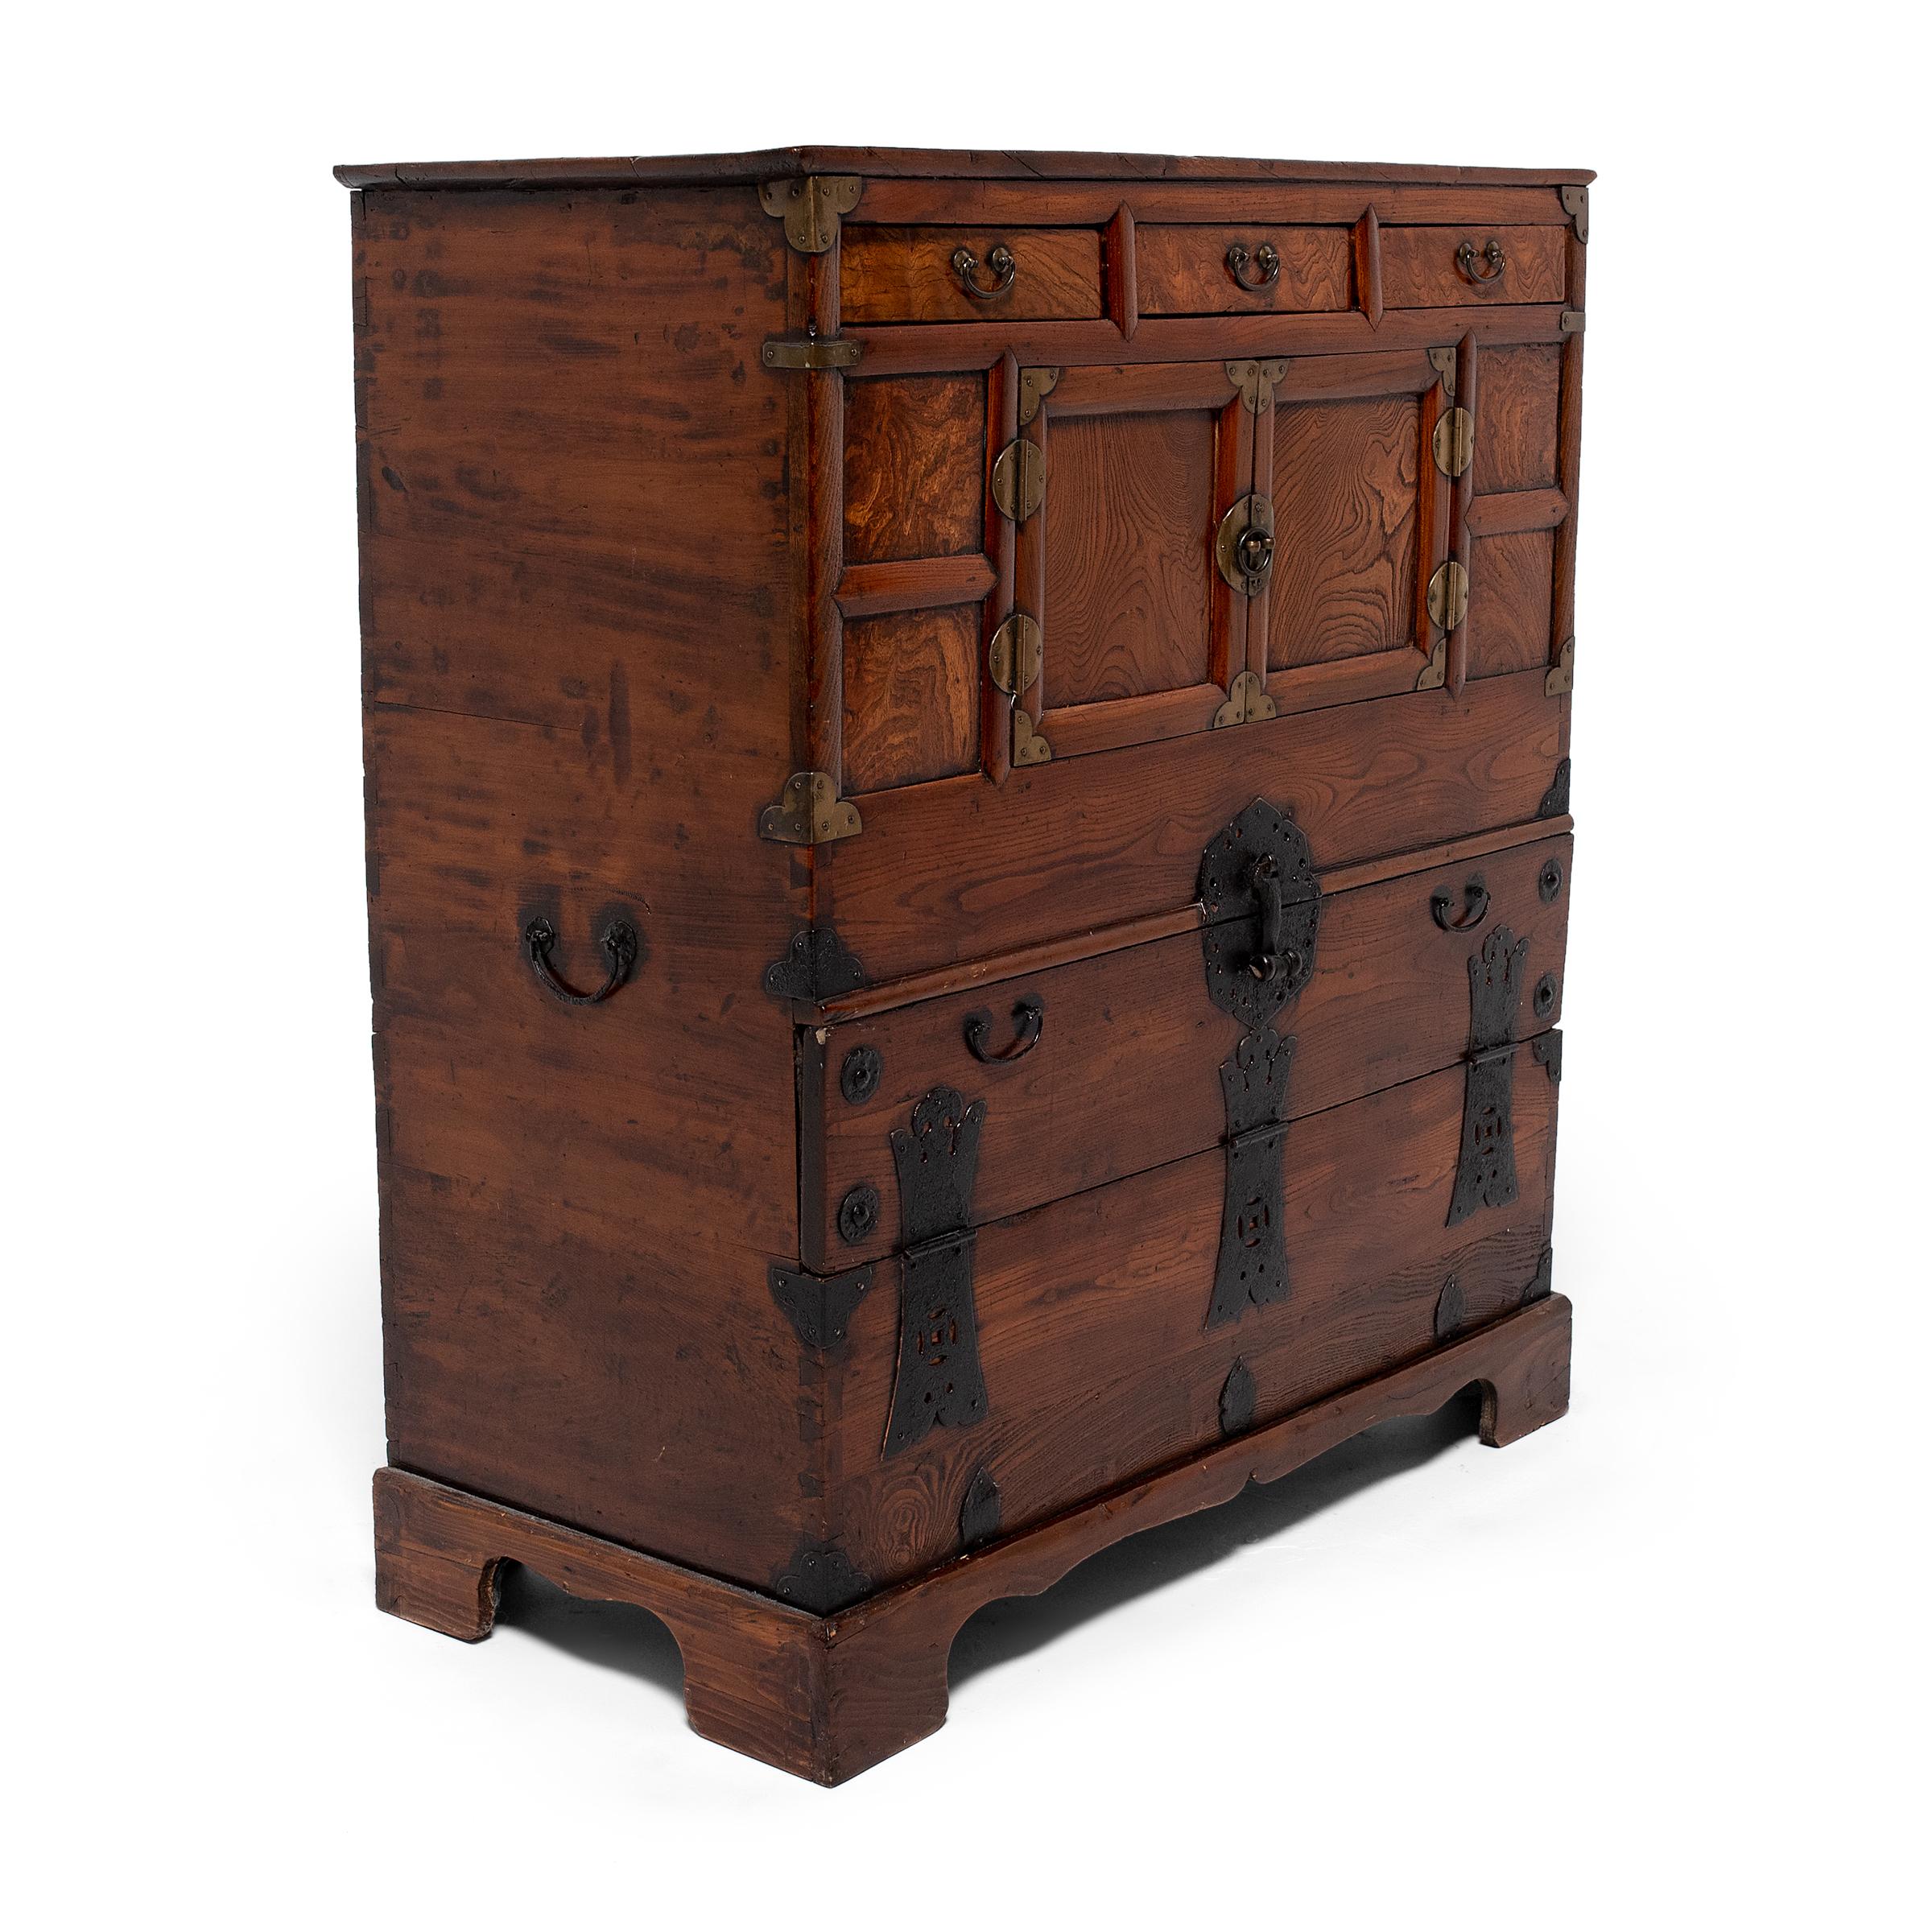 This early 20th century Korean cabinet was modified at some point in its life to combine a two-door paneled wardrobe (jang) with a low blanket chest (pandaji). The wardrobe was used to store clothing in a women's quarters, and the chest was used